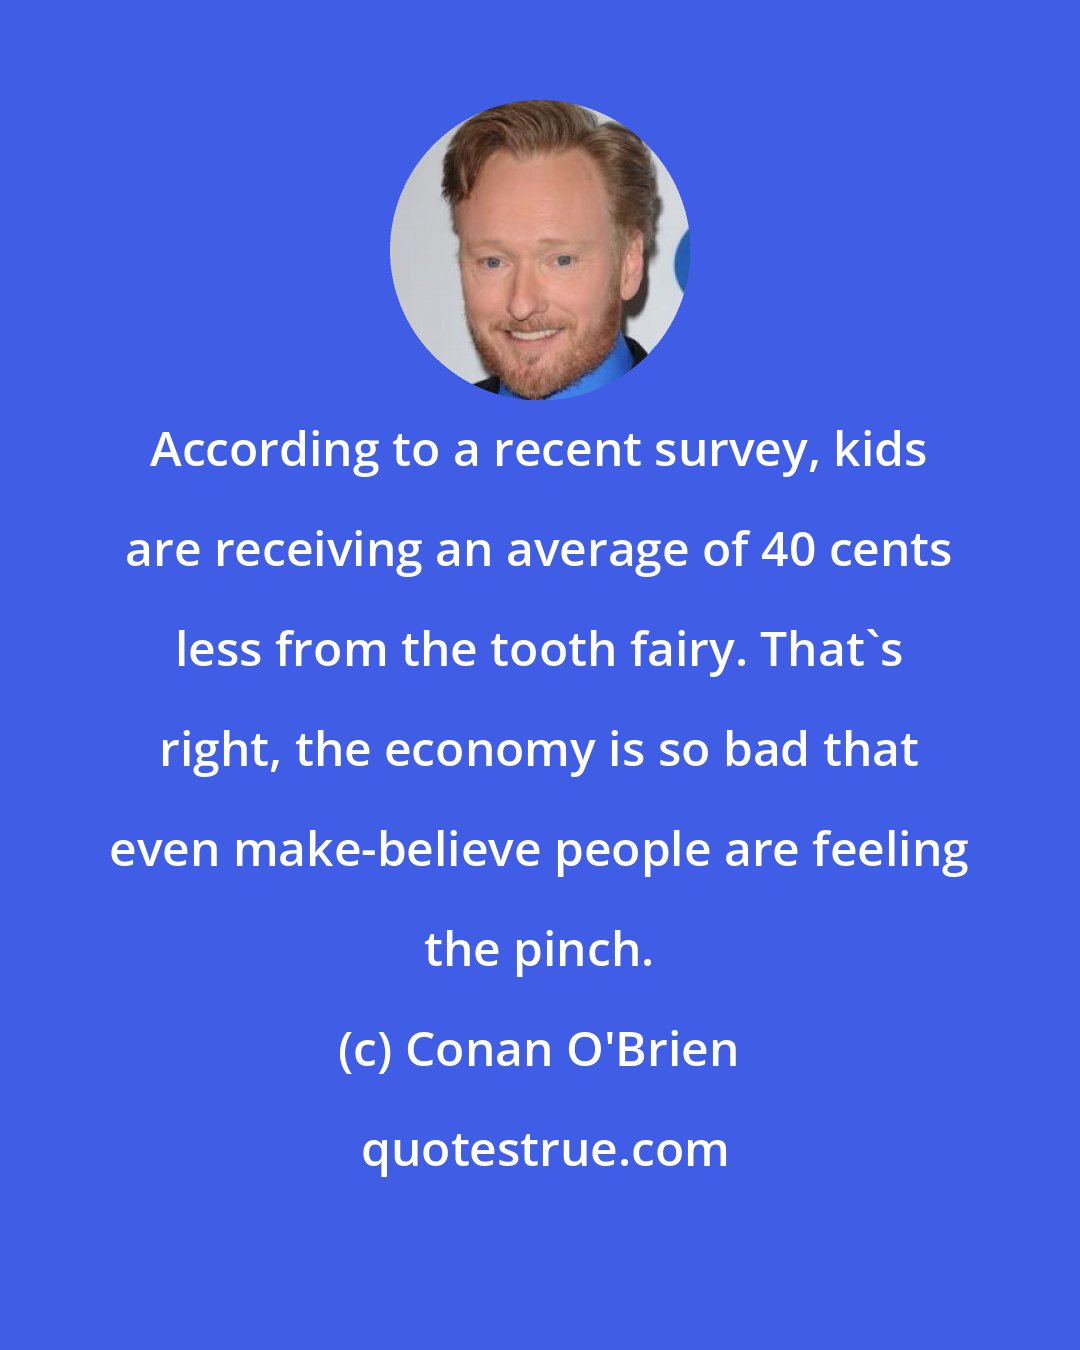 Conan O'Brien: According to a recent survey, kids are receiving an average of 40 cents less from the tooth fairy. That's right, the economy is so bad that even make-believe people are feeling the pinch.